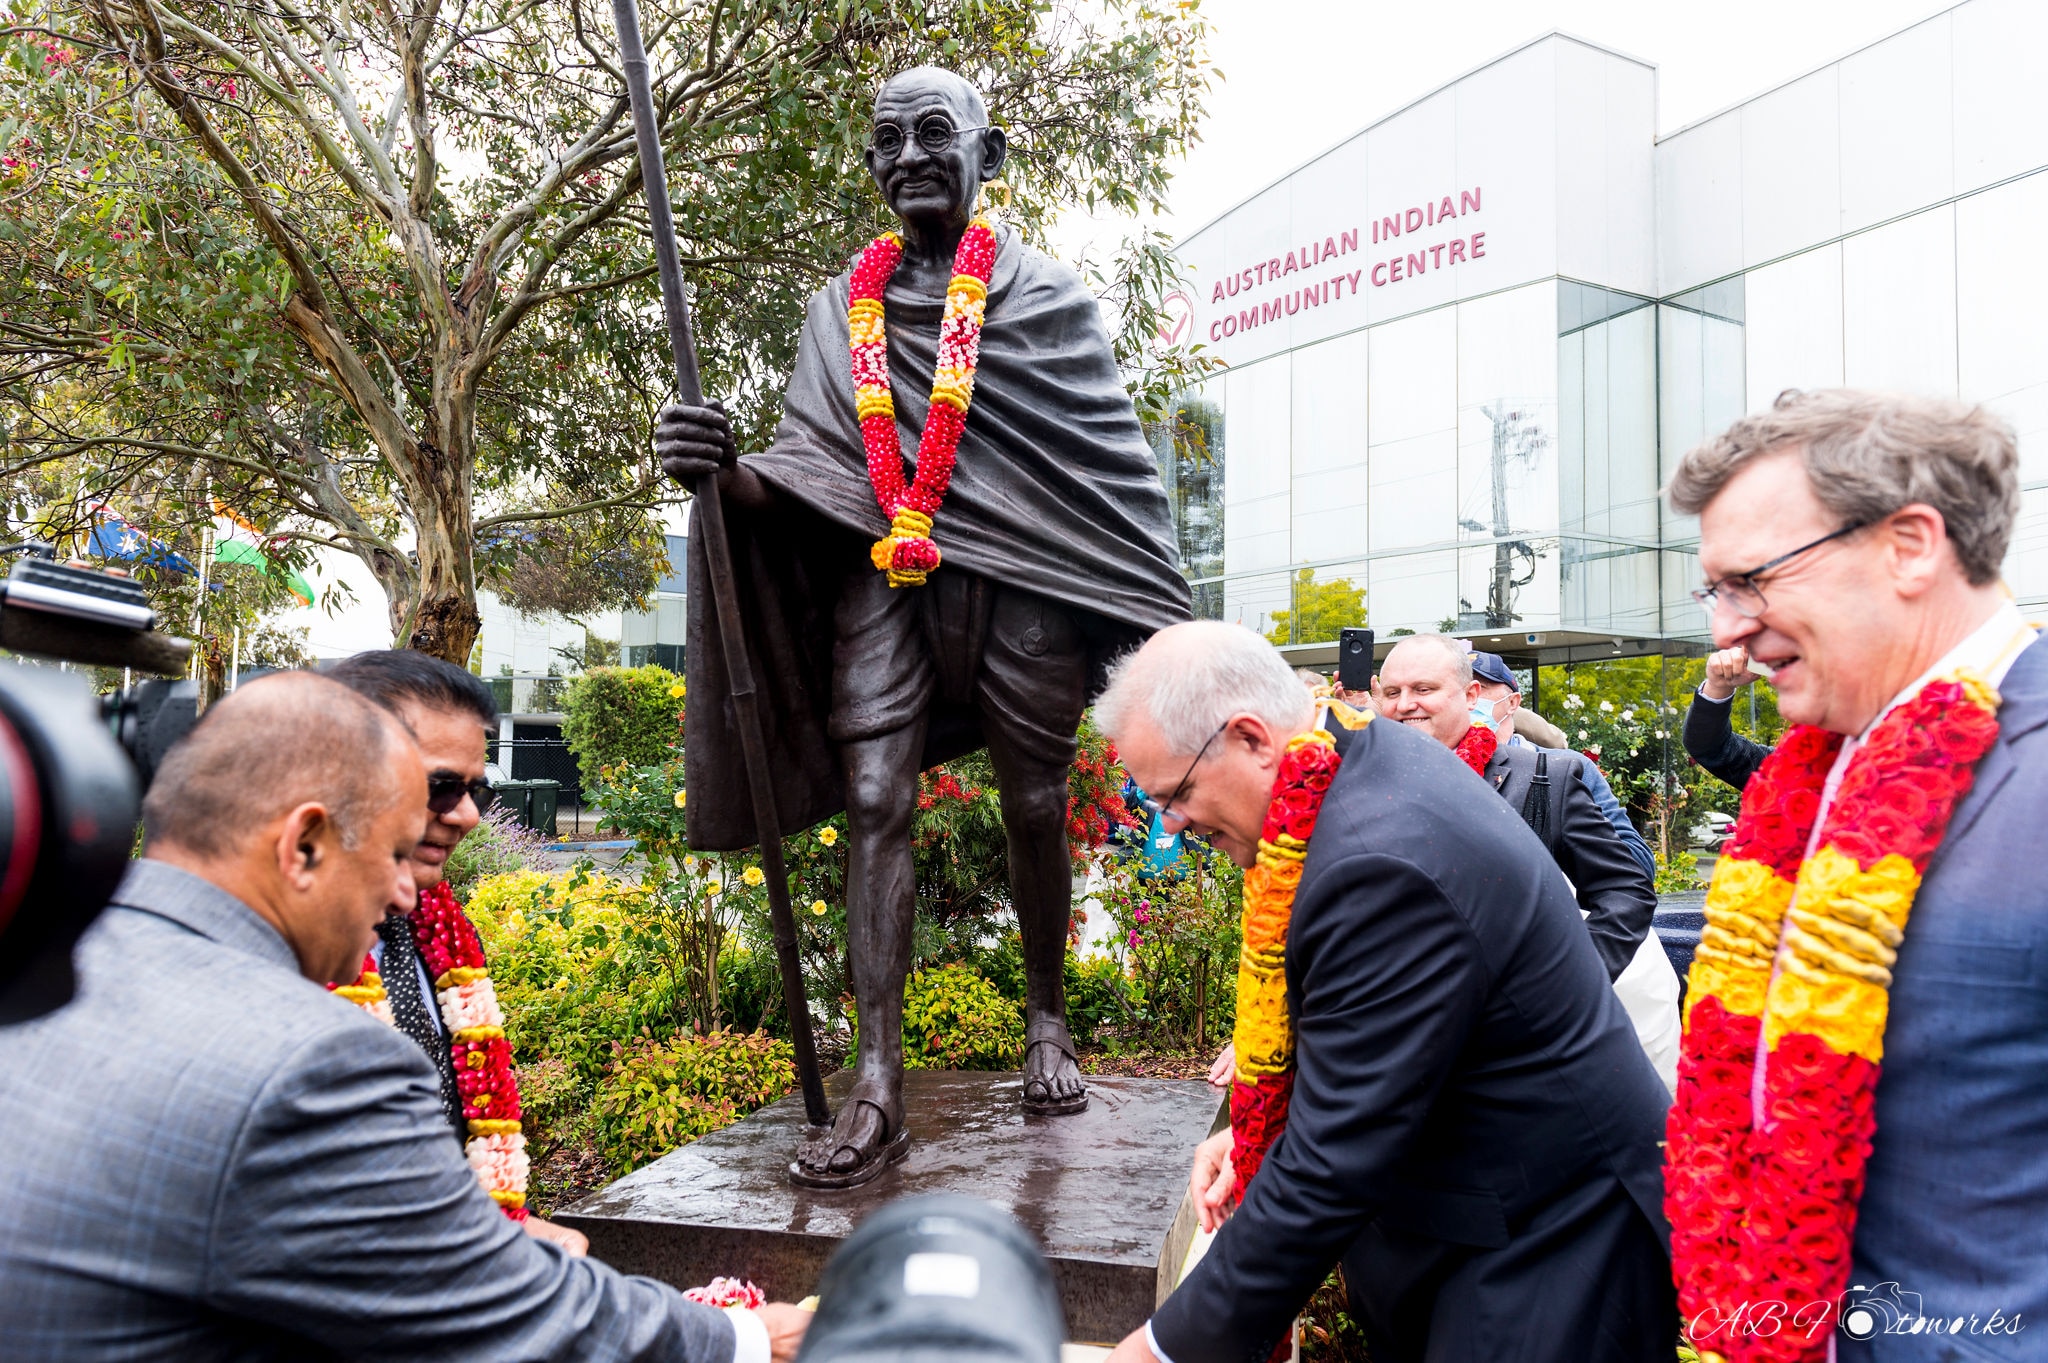 The statue of Mahatma Gandhi was unveiled by Prime Minister Scott Morrison on Friday.